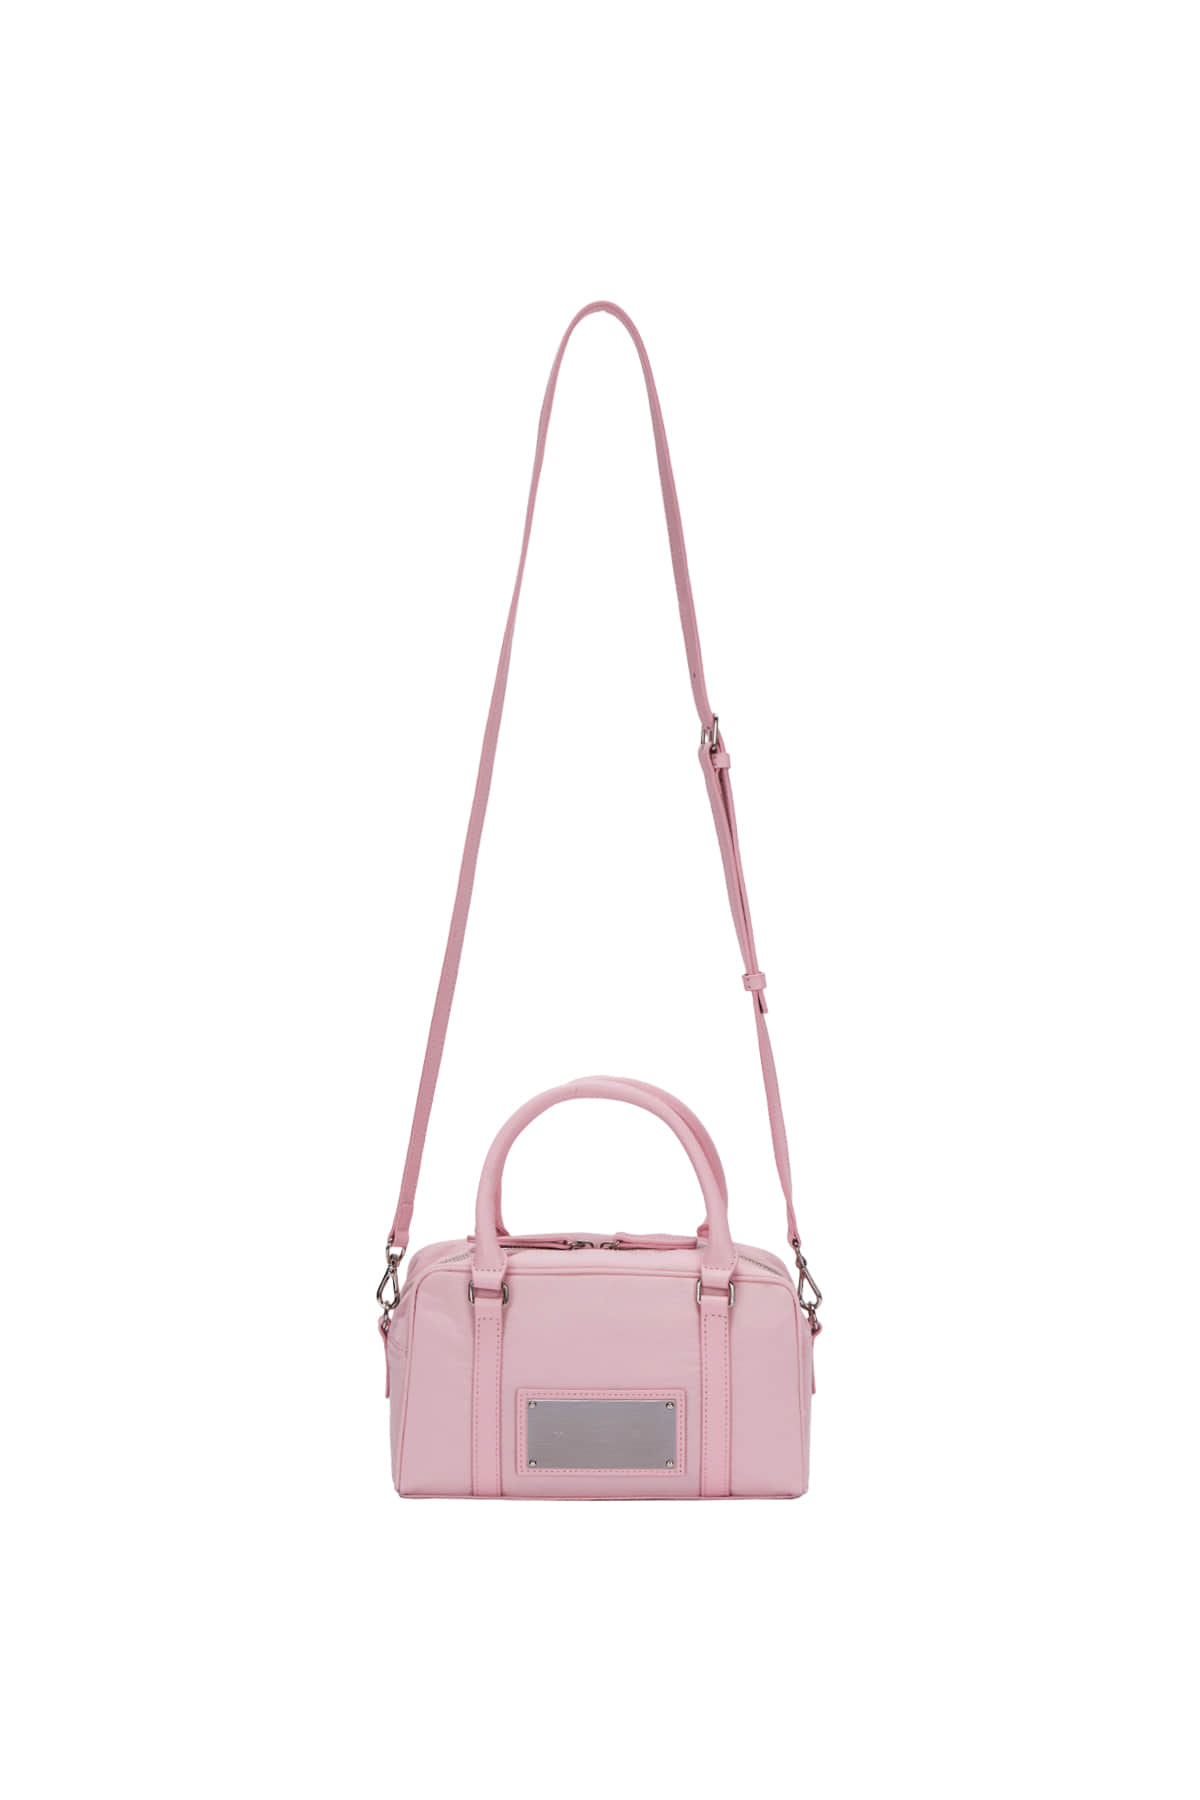 BABY SPORTY TOTE BAG IN PINK